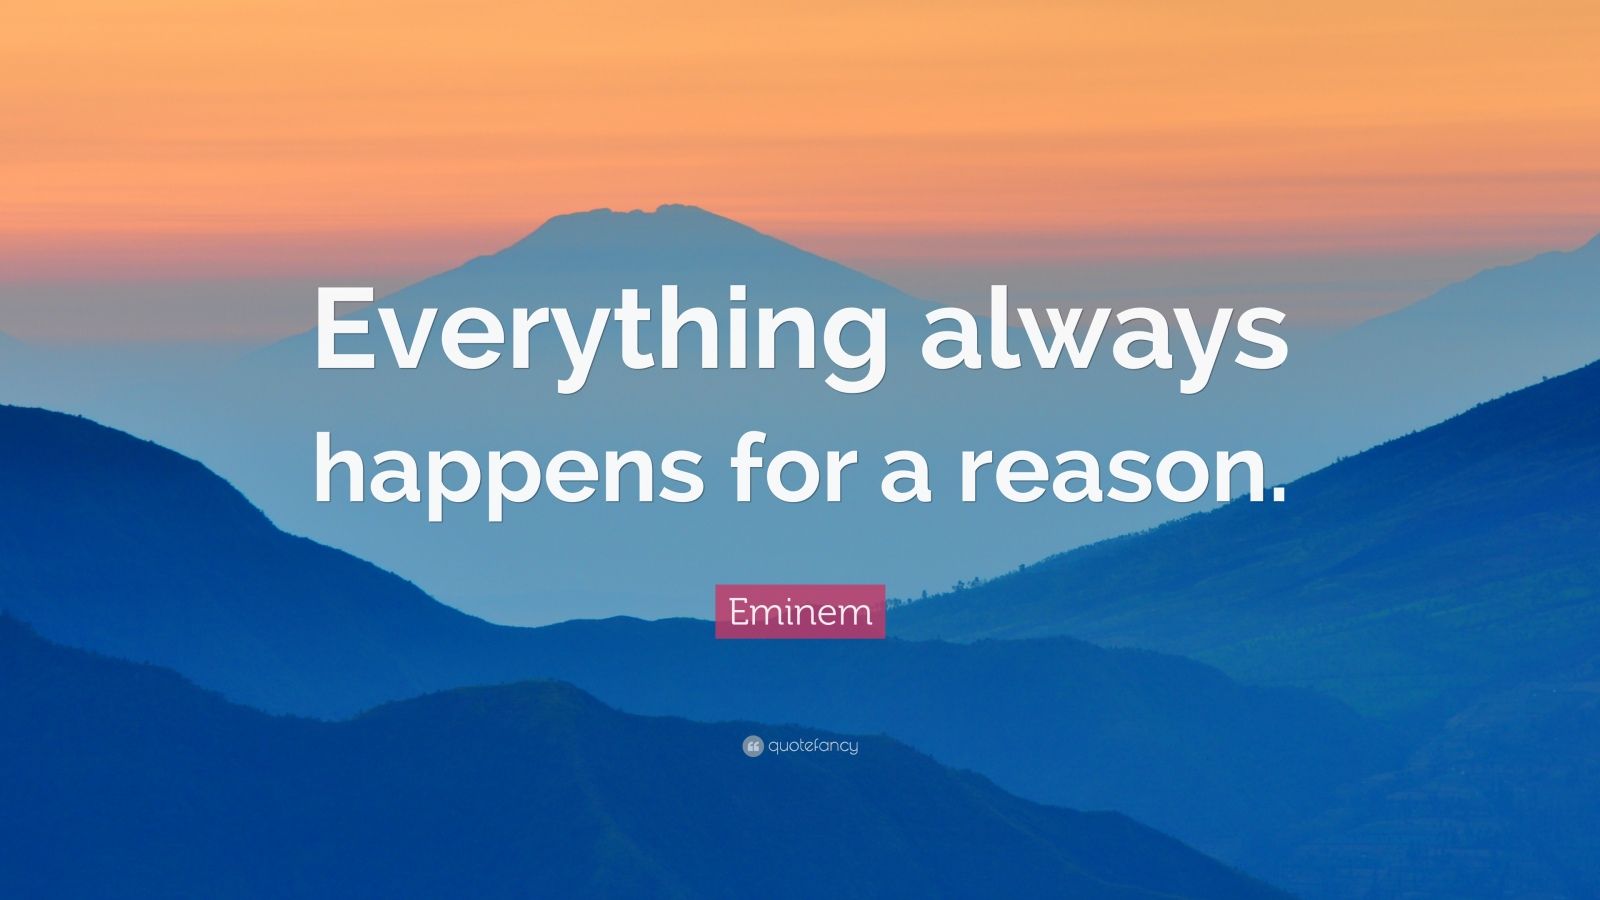 Eminem Quote: “Everything always happens for a reason.”